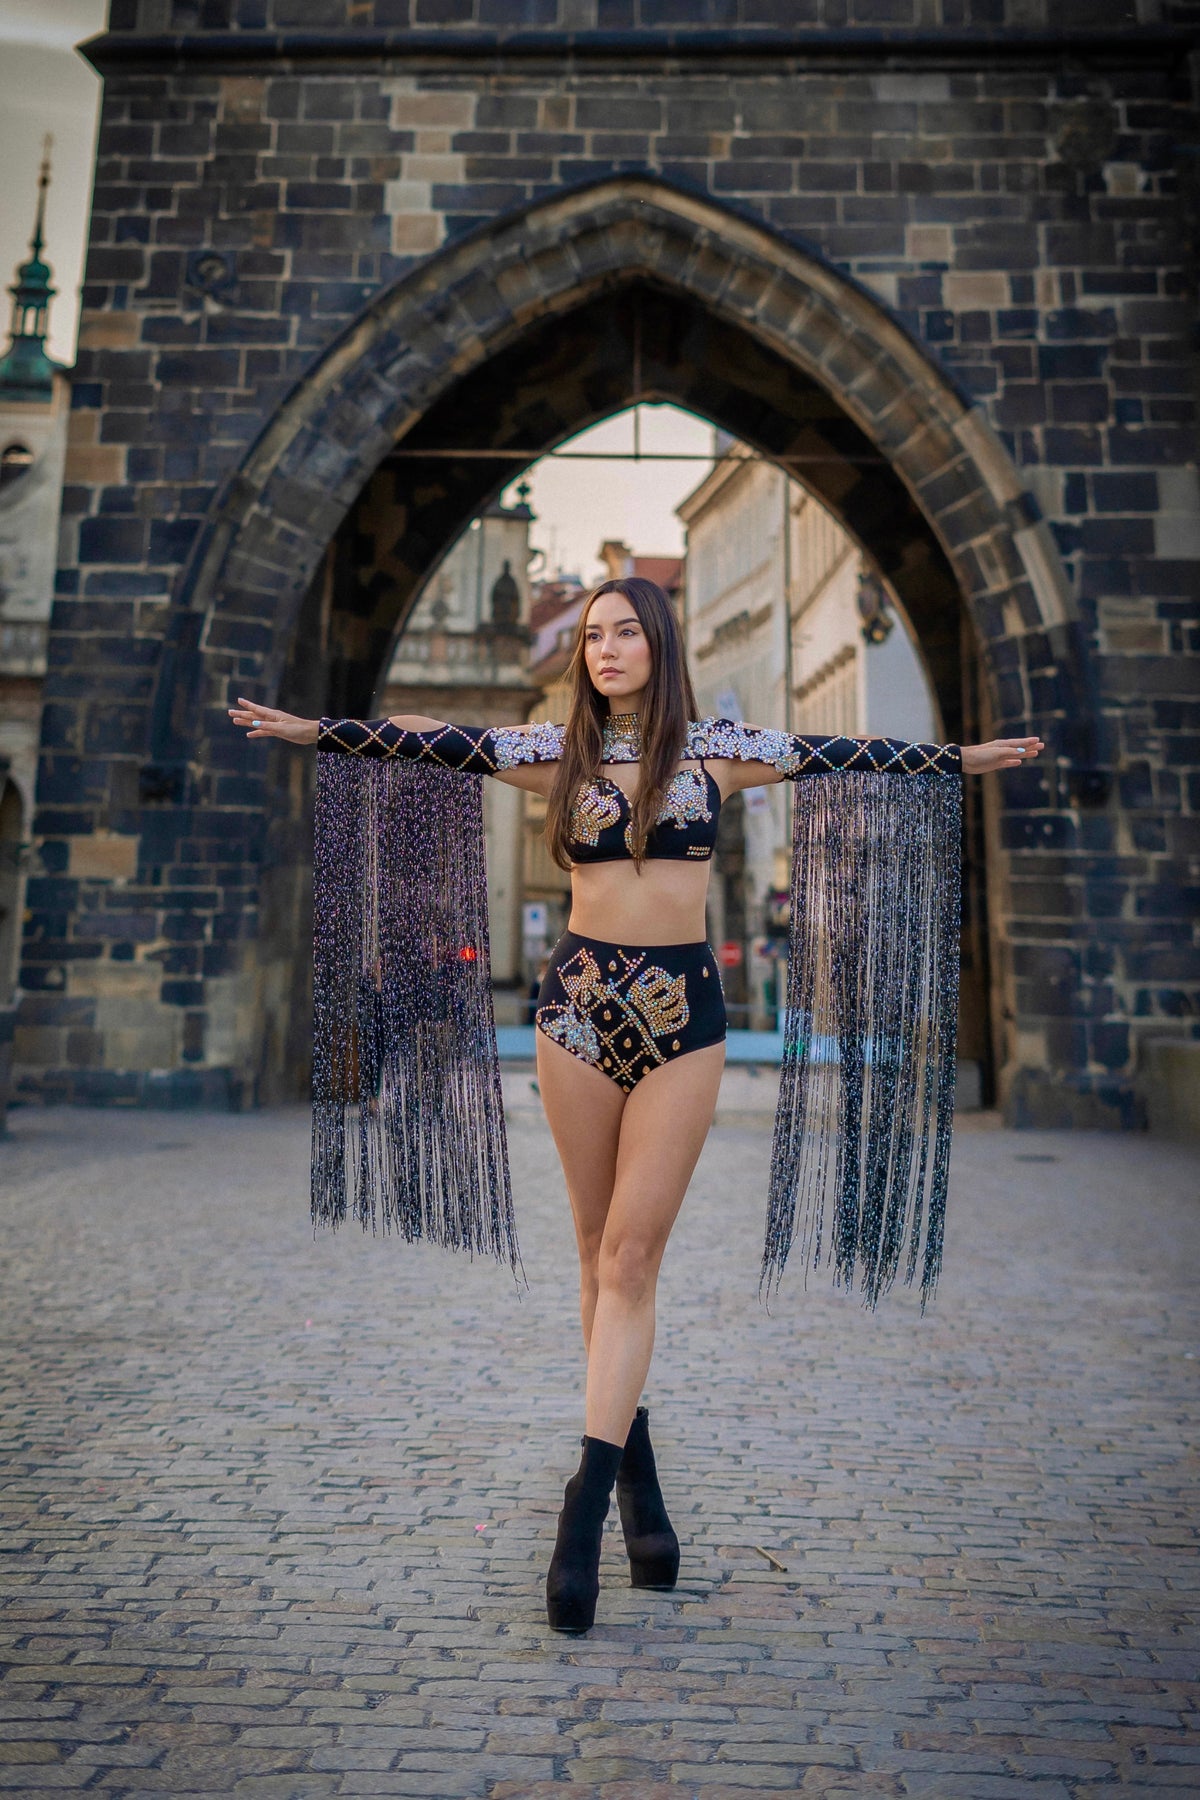 Singularity Festival Fringed Top Bra and Hot Pants 3-Piece Set